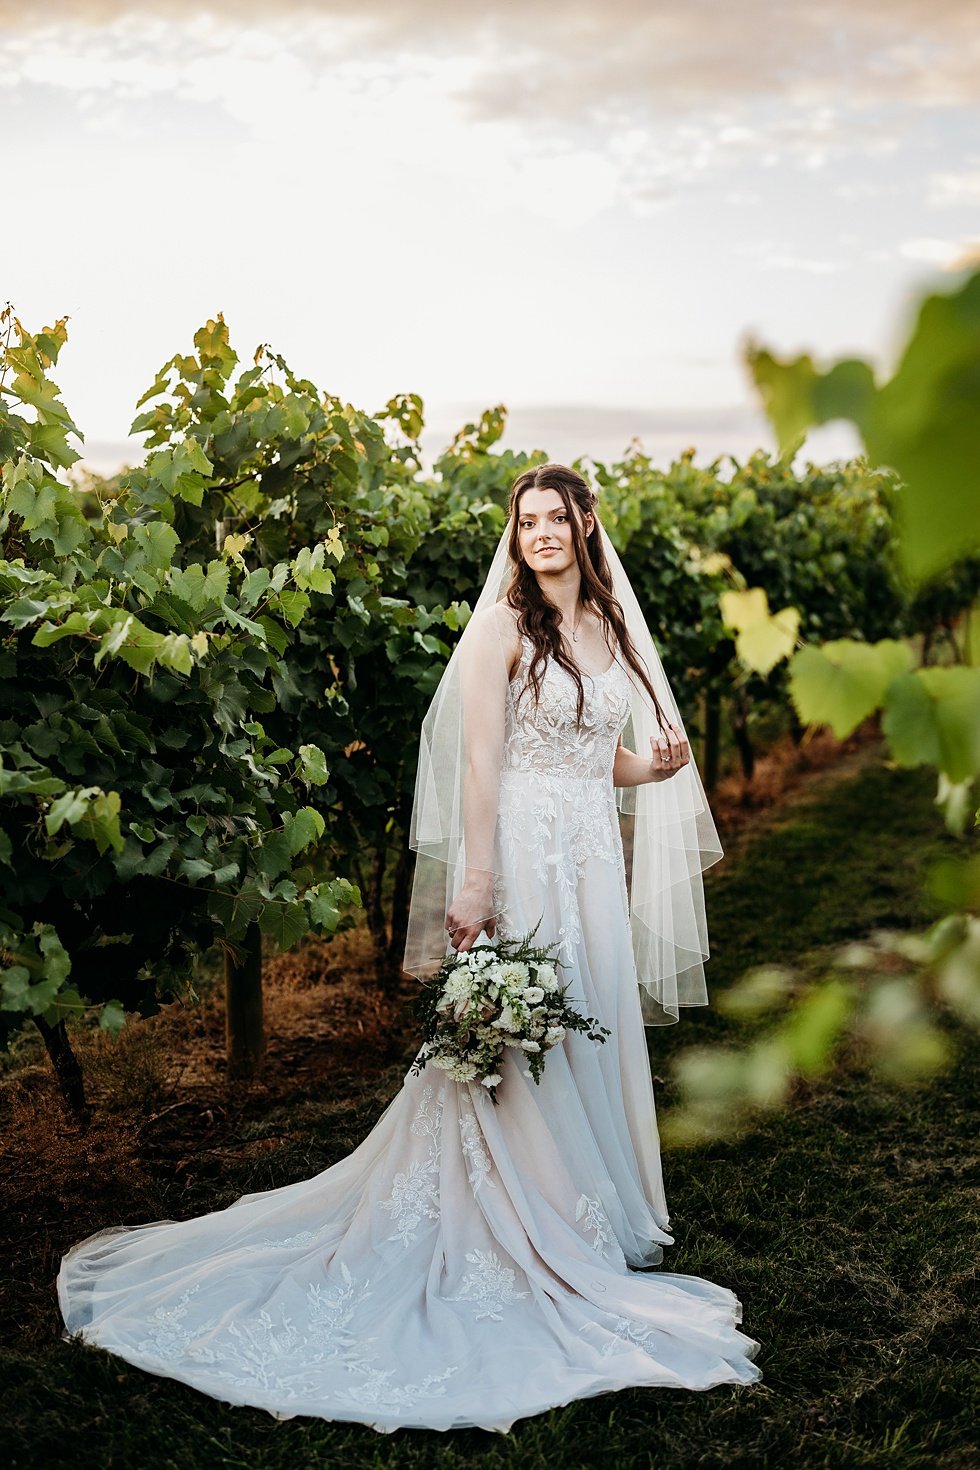  Sunset bridal portraits in vineyard. Wedding at Huber's Orchard and Winery in Starlight, Indiana. 